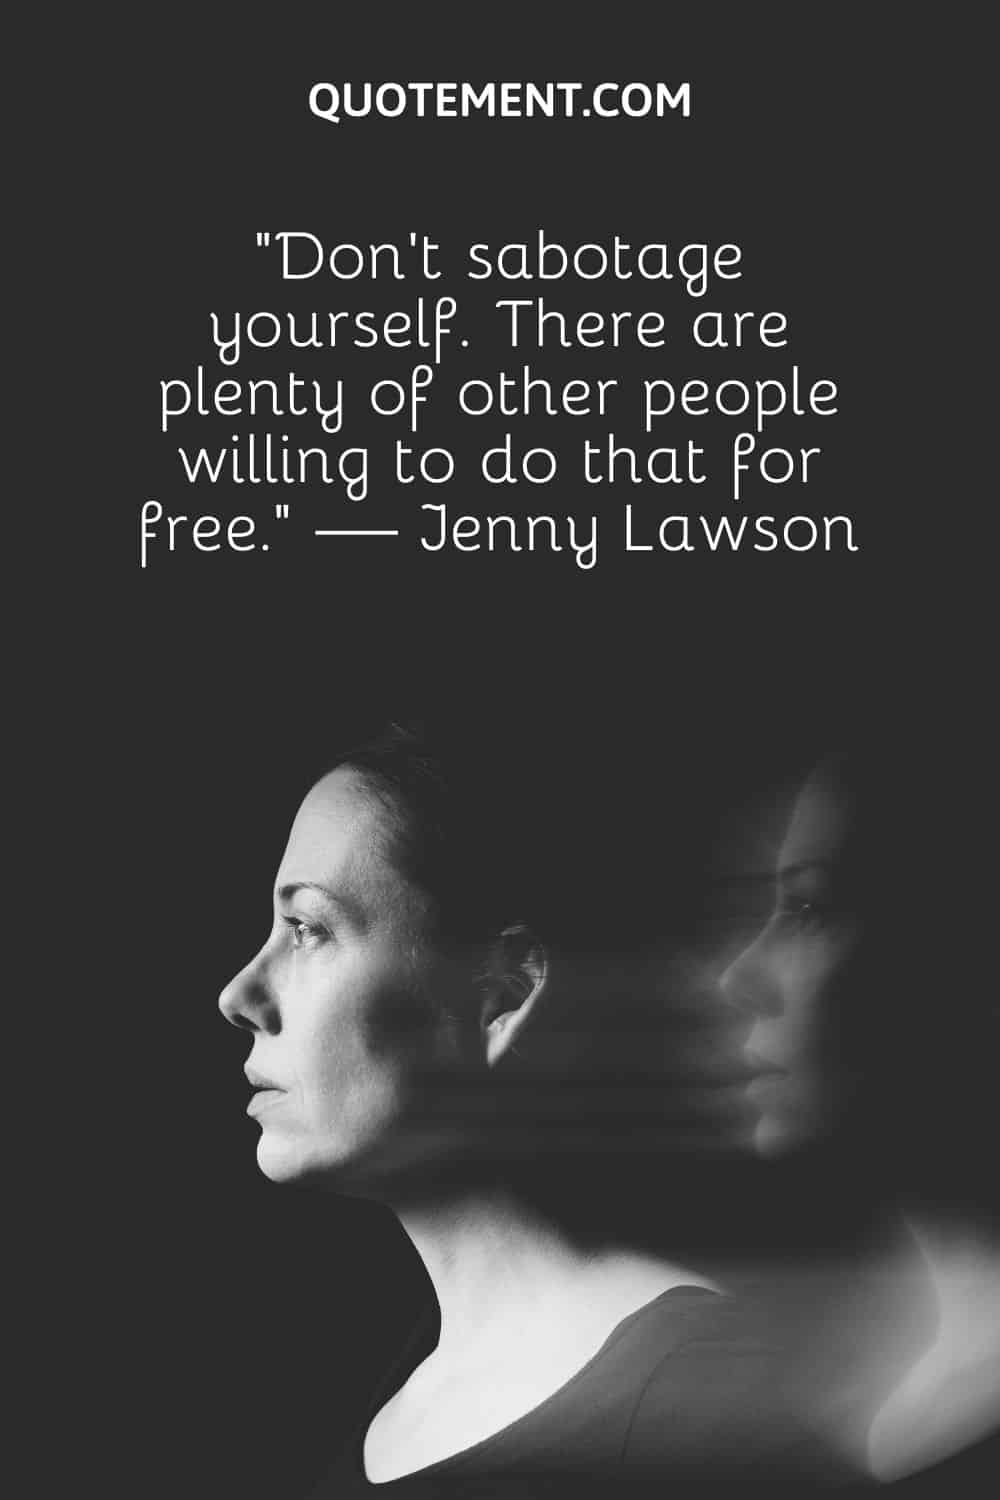 “Don’t sabotage yourself. There are plenty of other people willing to do that for free.” — Jenny Lawson